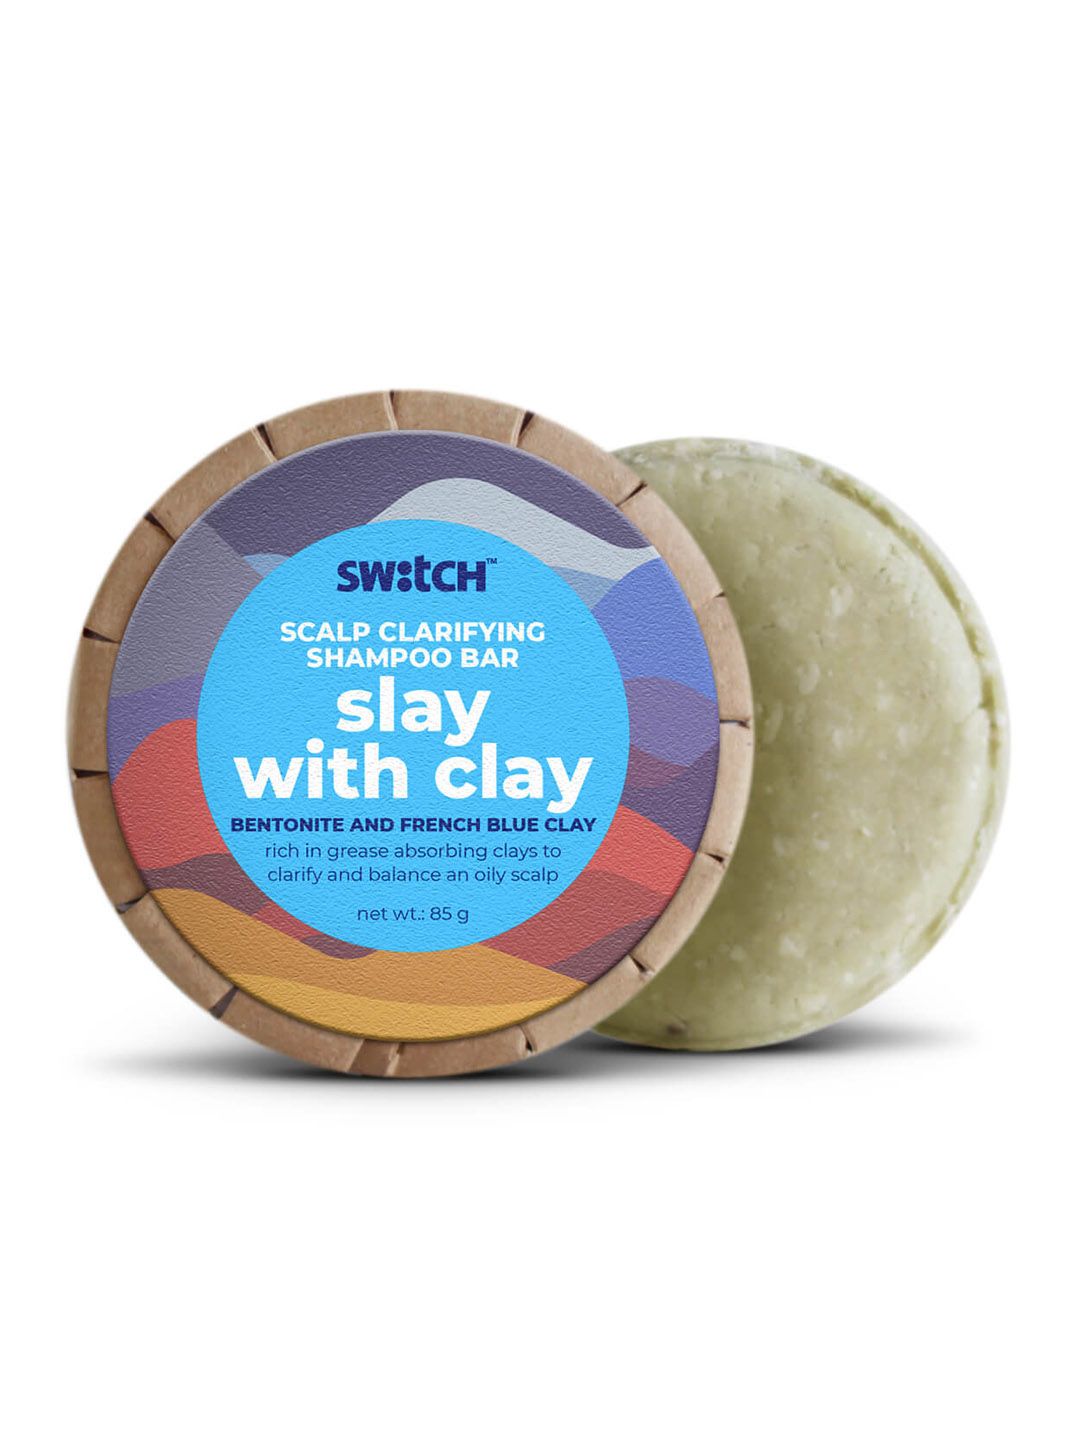 The Switch Fix Scalp Clarifying Slay With Clay  Shampoo Bar for Oily Scalp - 85g Price in India